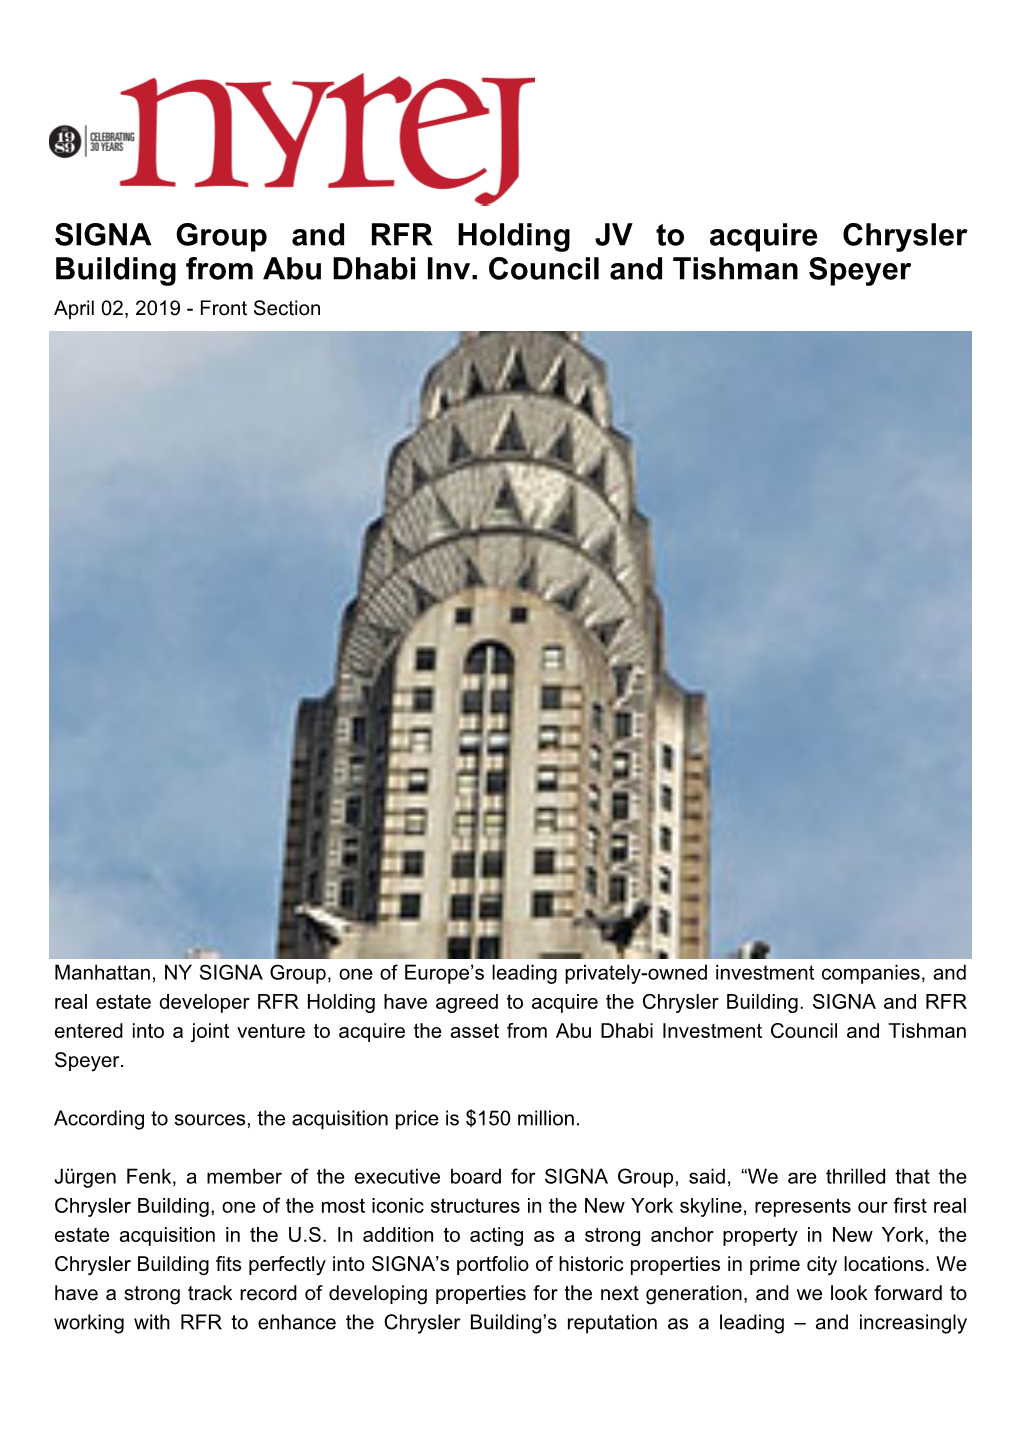 SIGNA Group and RFR Holding JV to Acquire Chrysler Building from Abu Dhabi Inv